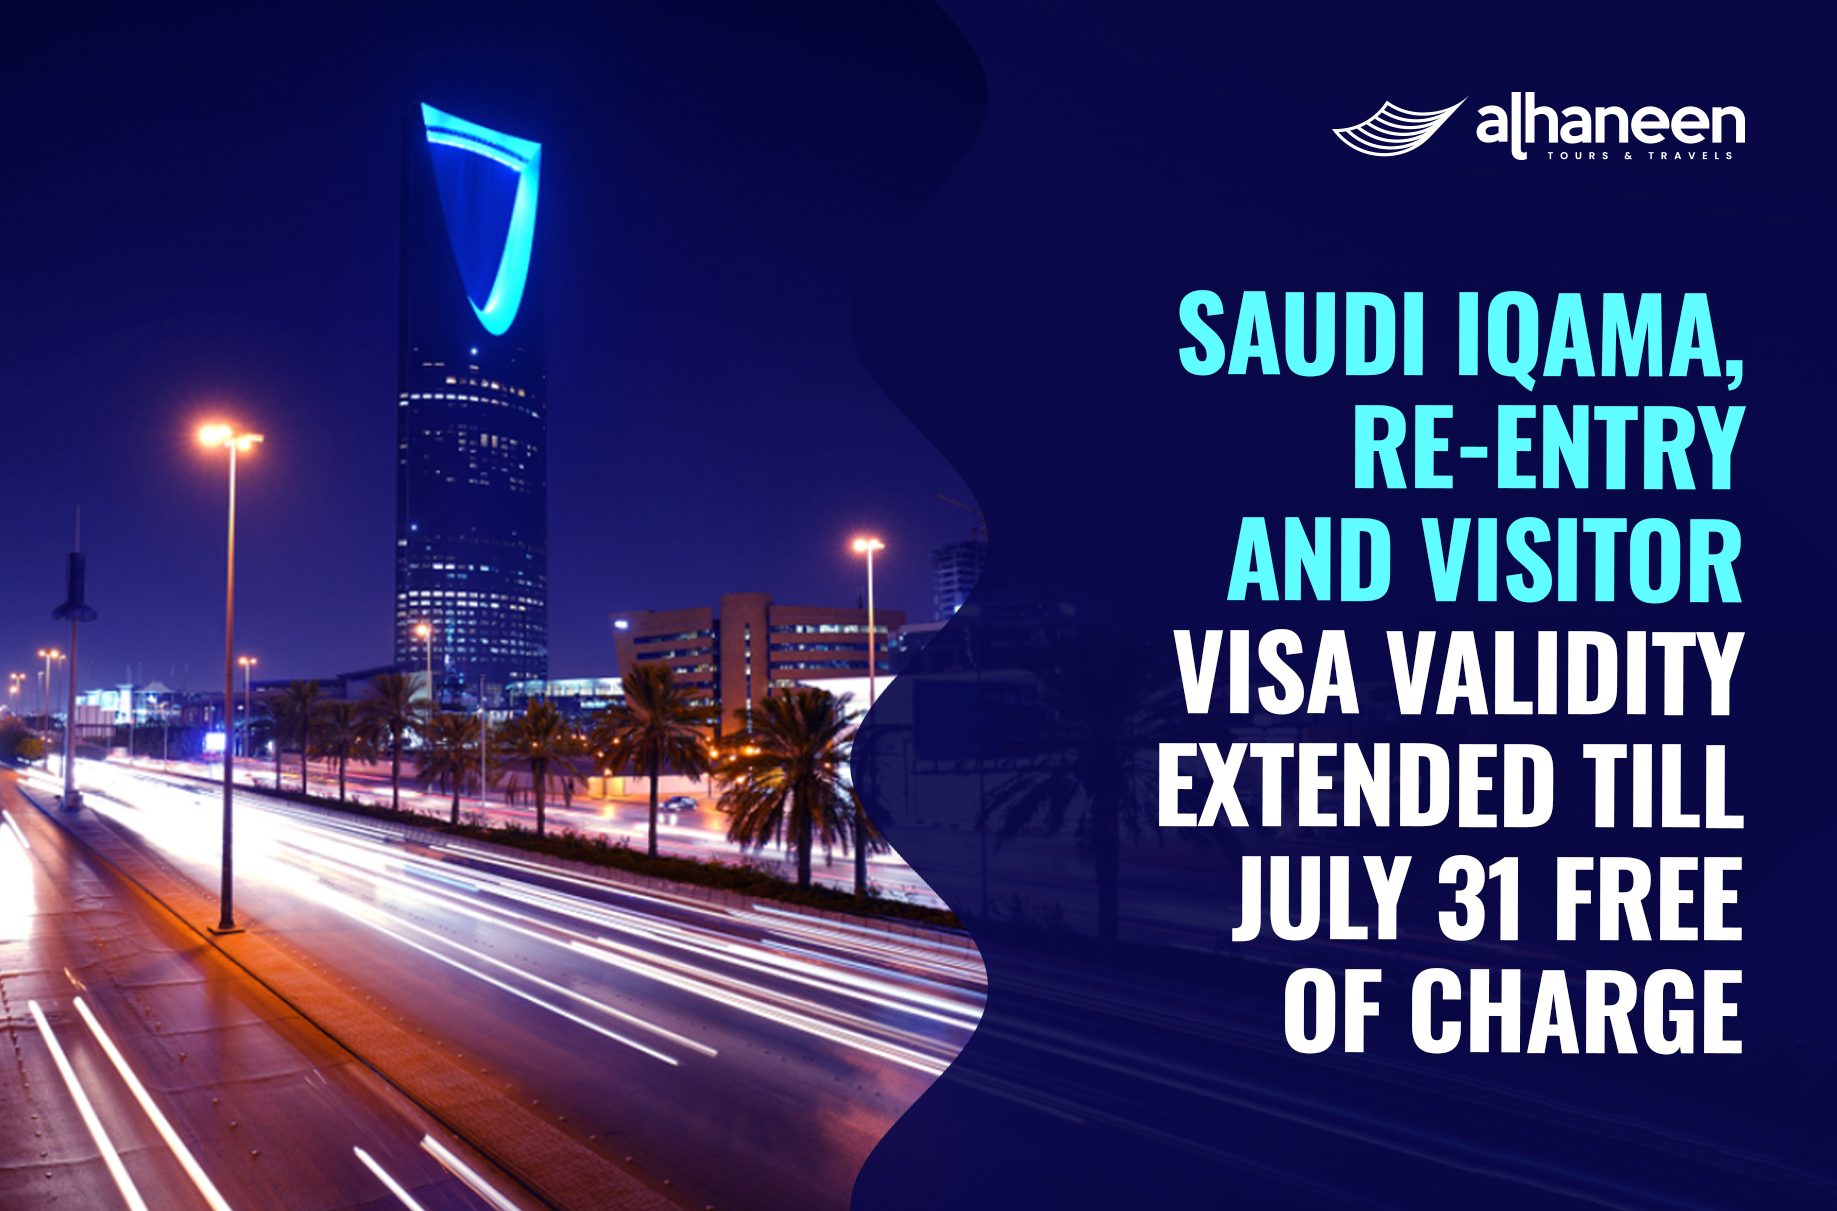 Saudi Iqama, re-entry and visitor visa validity extended till July 31 free of charge